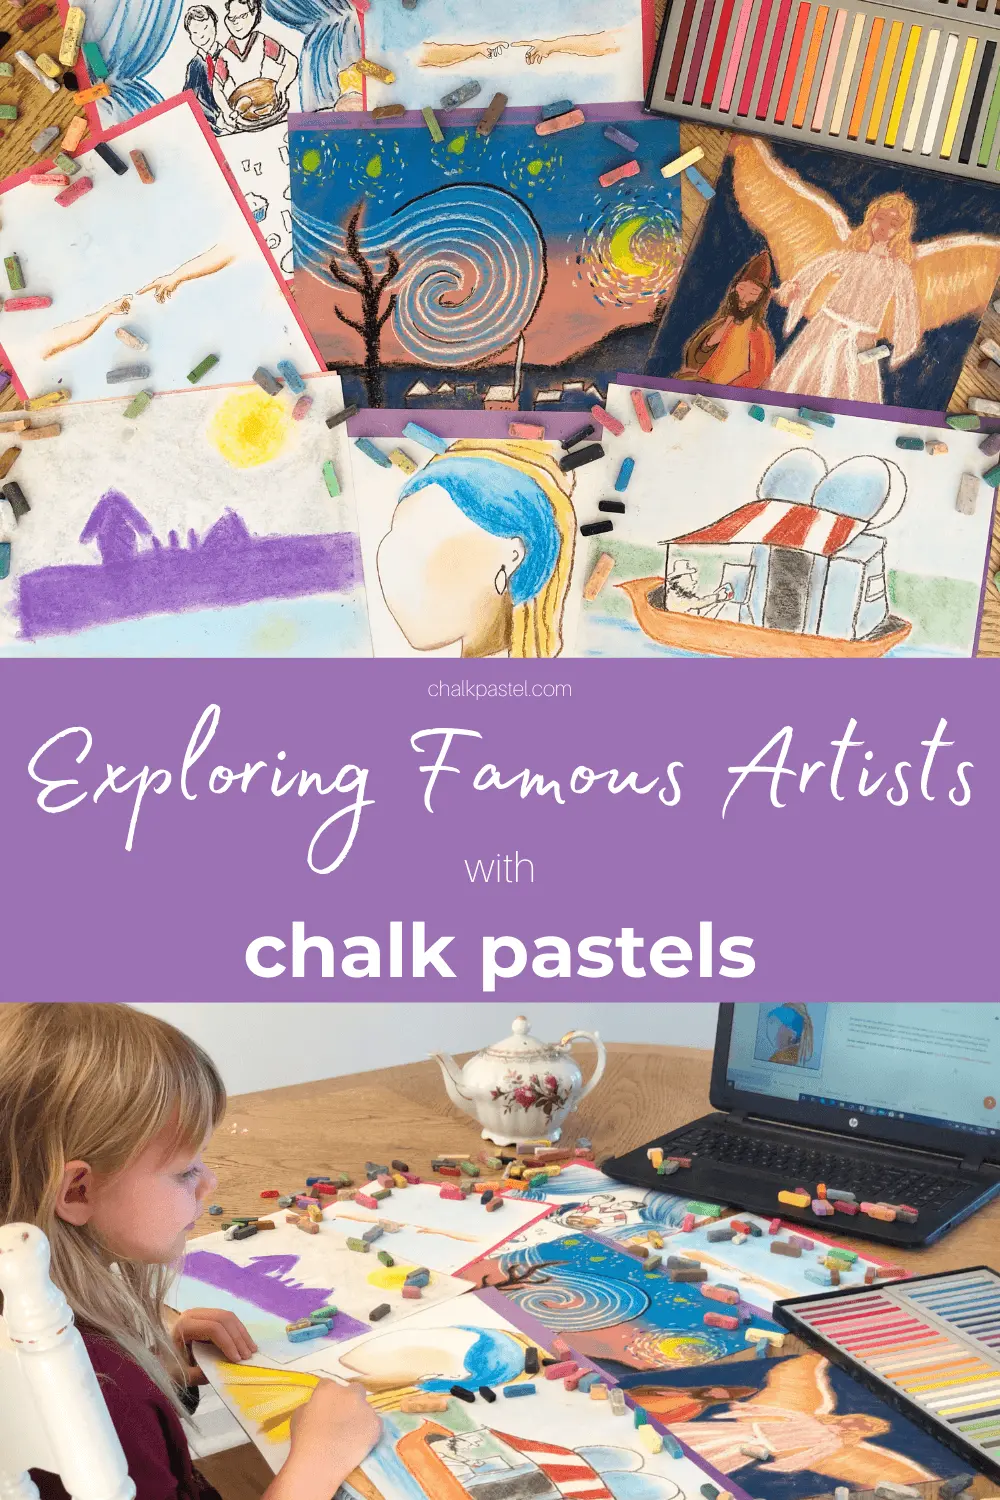 Exploring Famous Artists with Chalk Pastels: Exploring famous artists with your kids has never been easier! Now you can expose your children to the glory and wonder of master artists like da Vinci, Michelangelo, Monet, Rembrandt, Vermeer, and so many more with chalk pastels! #famousartistsforkids #famousartists #chalkpastels #masterartists #homeschool